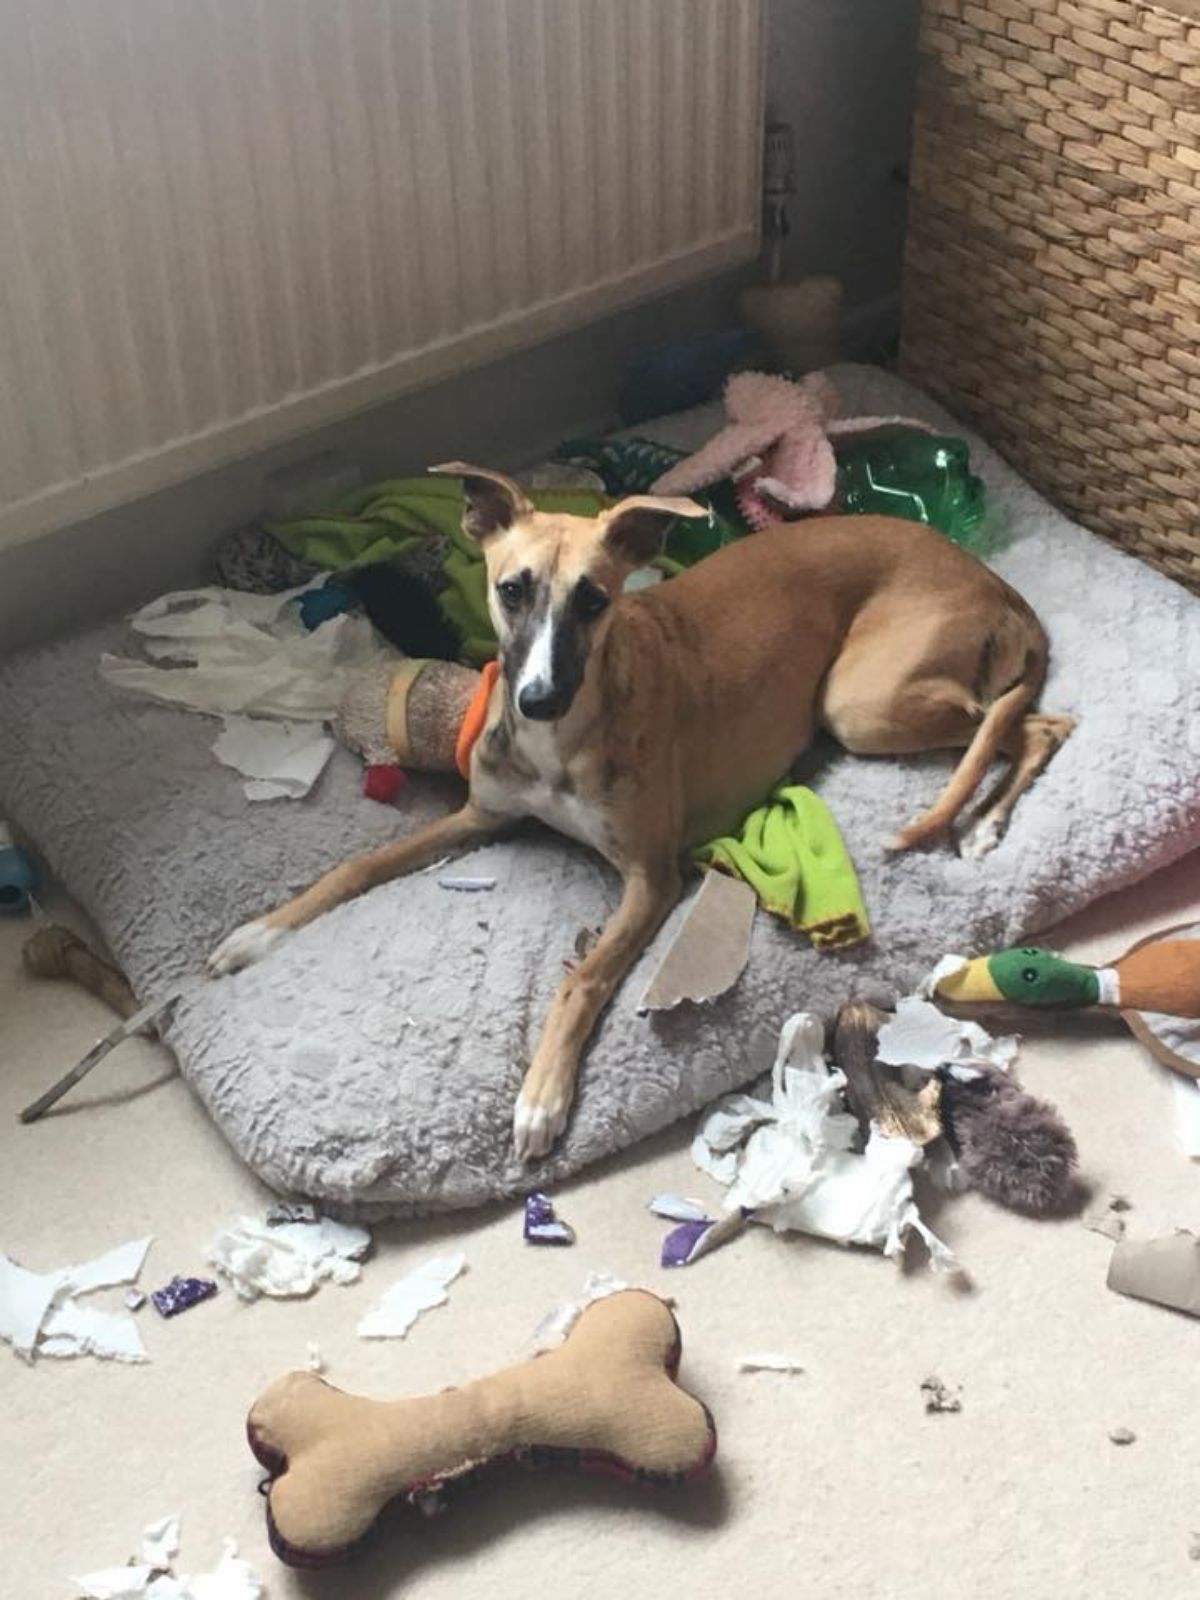 brown and white dog laying on a grey dog bed with toys strewn around and some ripped up toilet paper